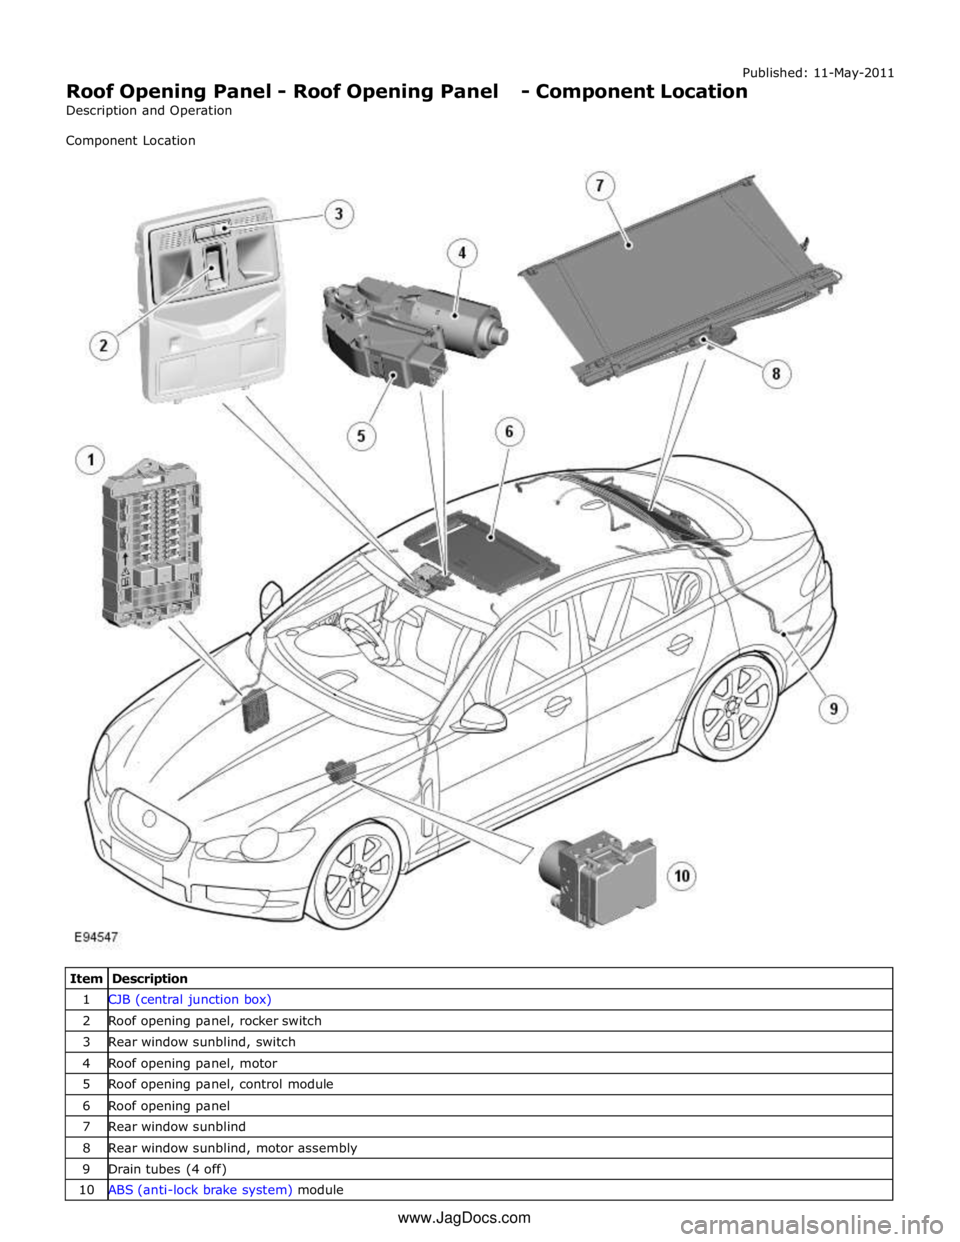 JAGUAR XFR 2010 1.G Workshop Manual Published: 11-May-2011 
Roof Opening Panel - Roof Opening Panel - Component Location 
Description and Operation 
Component Location 
 
 
 
 
 
 
 
 
 
 
 
 
 
 
 
 
 
 
 
 
 
 
 
 
 
 
 
 
 
 
 
 
 
 